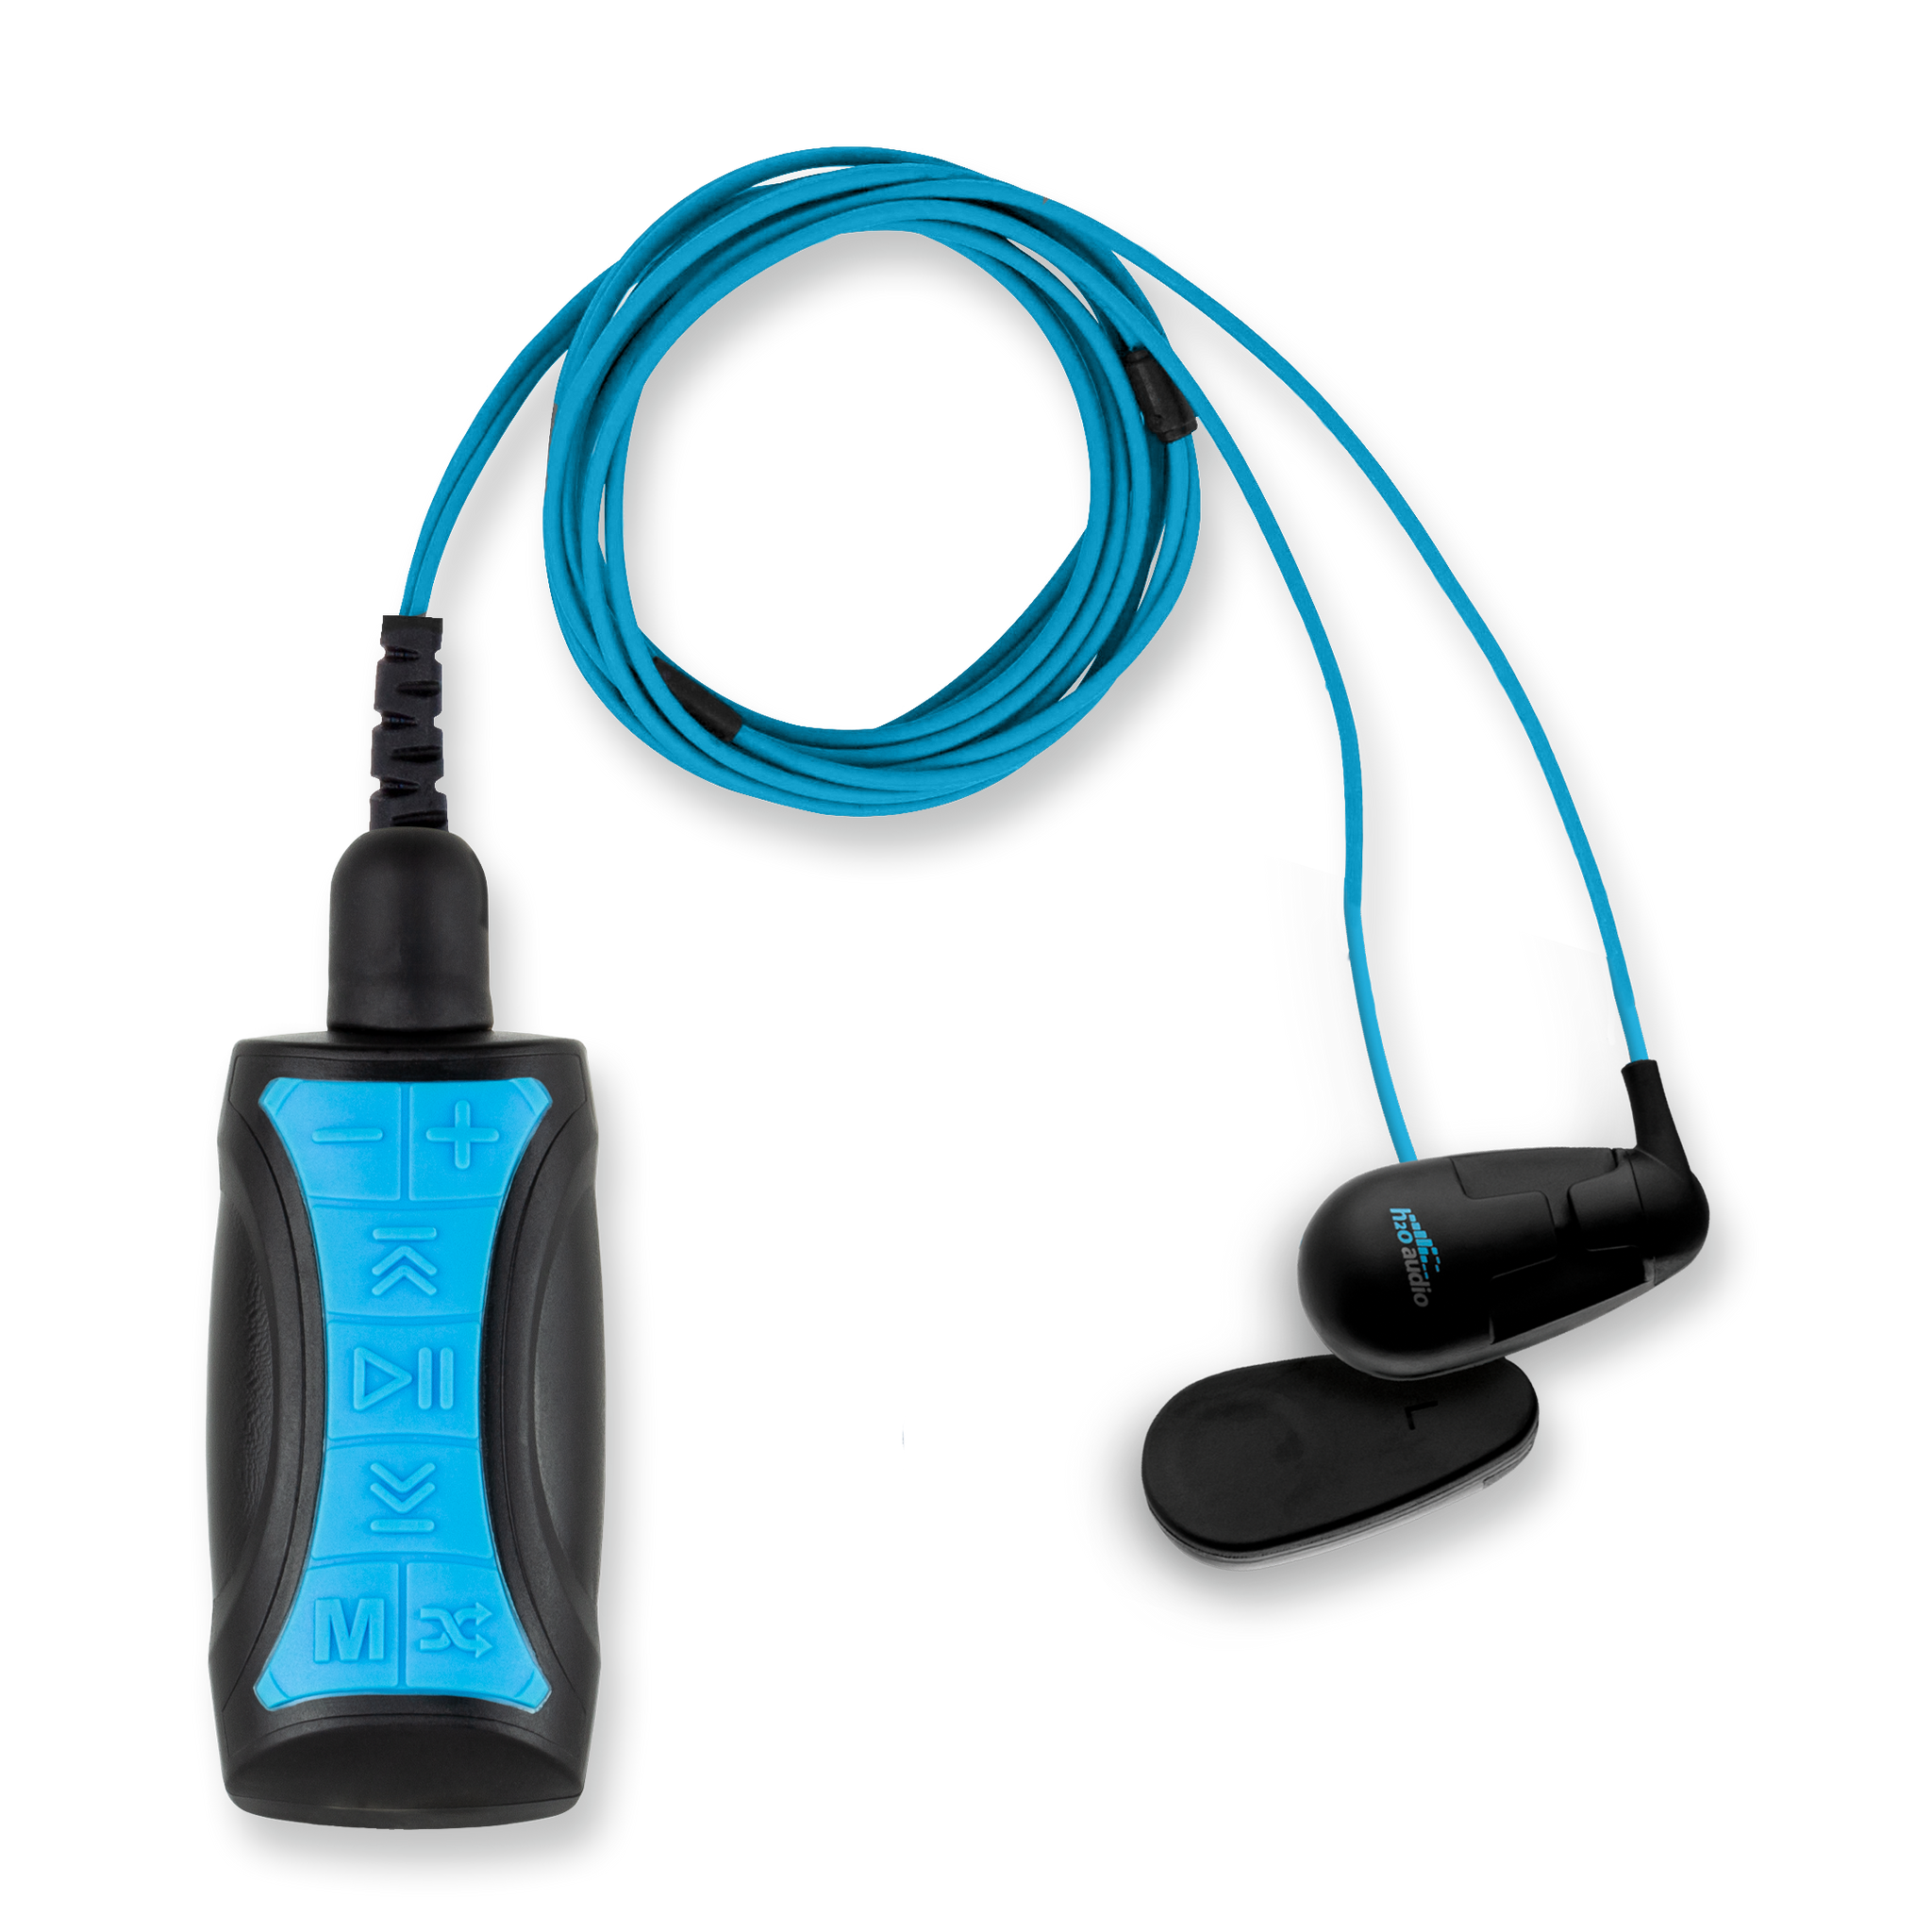 Waterproof MP3 player with Bone Conduction Headphones for Swimming - H2O  Audio